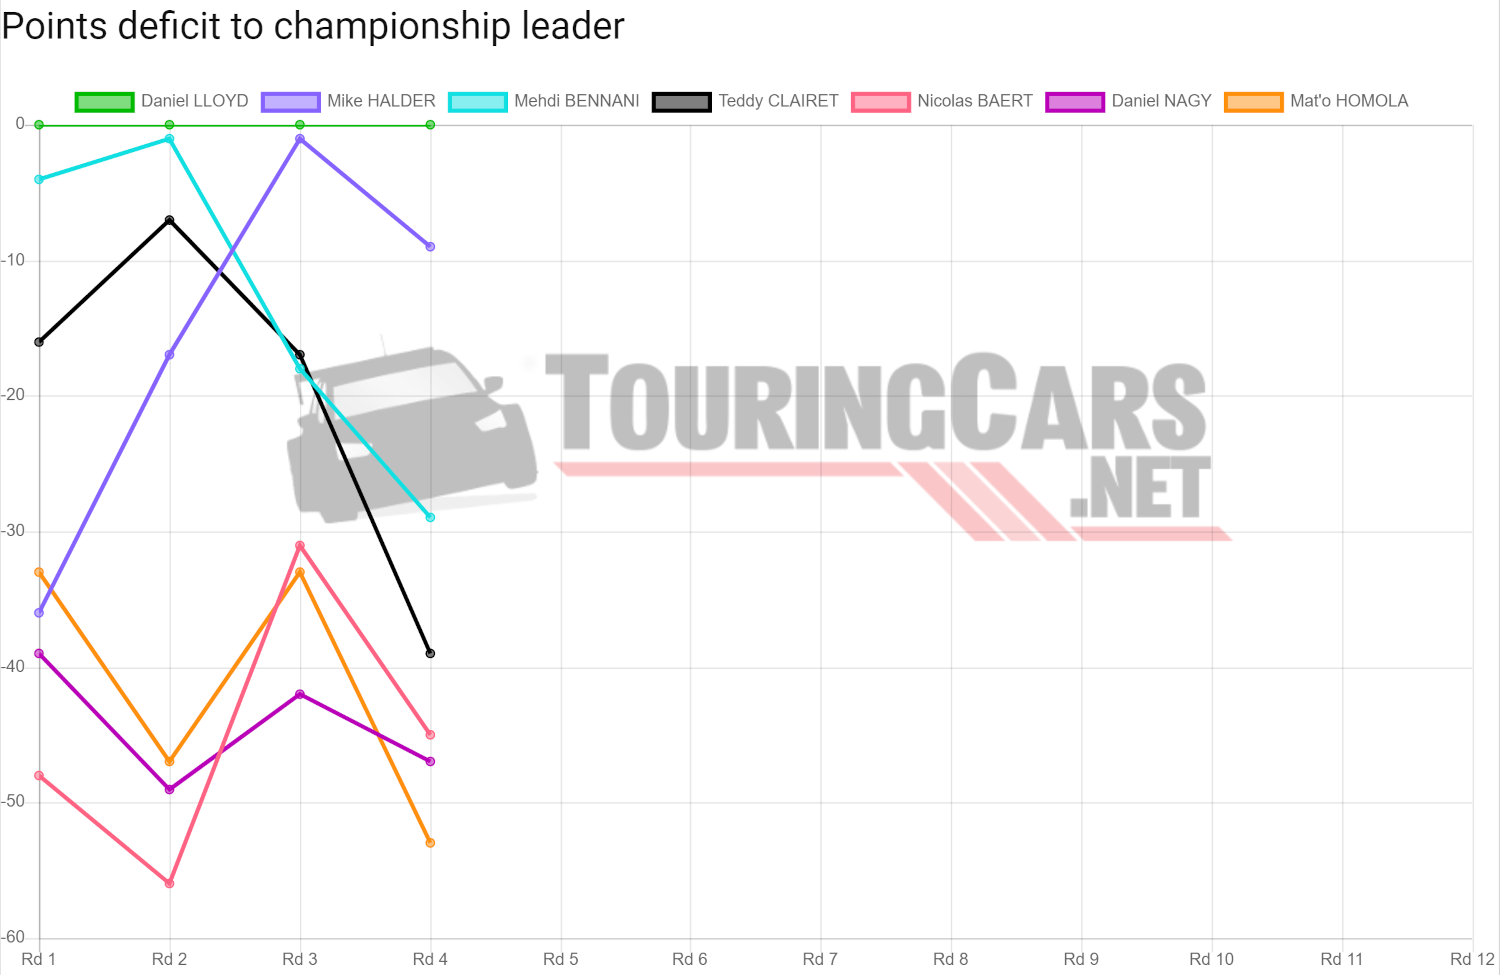 TCR Europe points deficit after Round 4